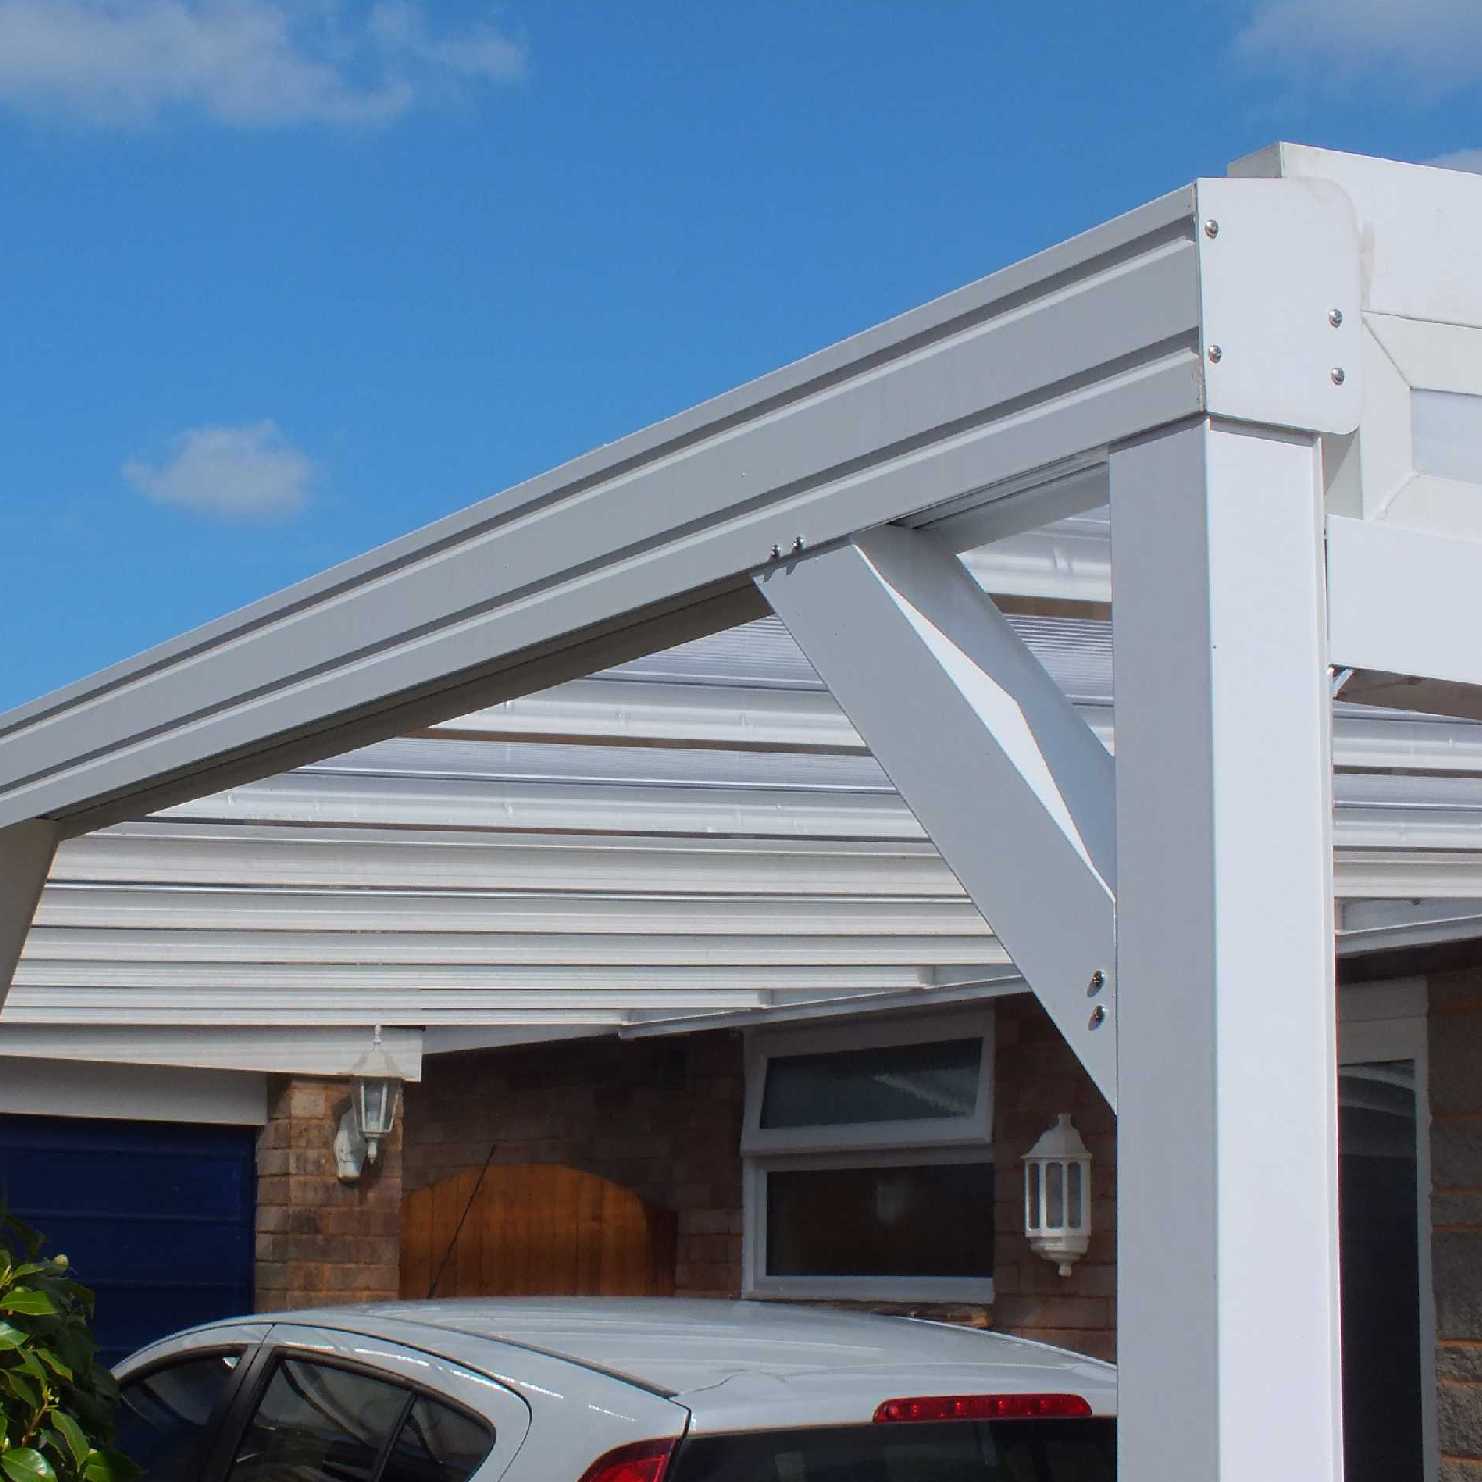 Great deals on Omega Smart Lean-To Canopy, White with 16mm Polycarbonate Glazing - 3.1m (W) x 1.5m (P), (2) Supporting Posts